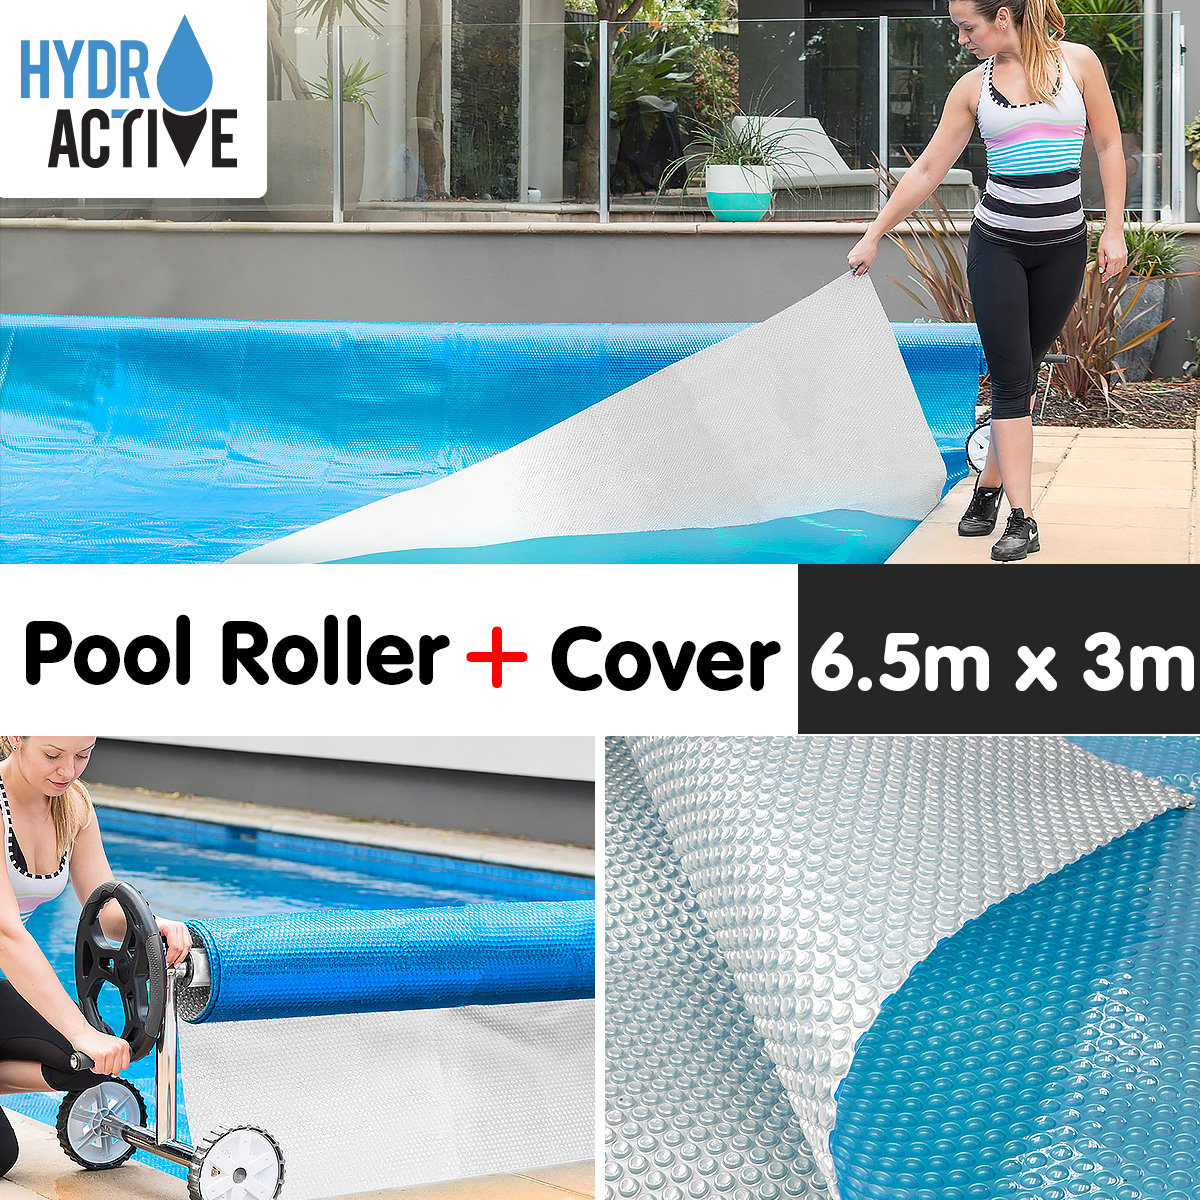 400micron Swimming Pool Roller Cover Combo - Silver/Blue - 6.5m x 3m 2